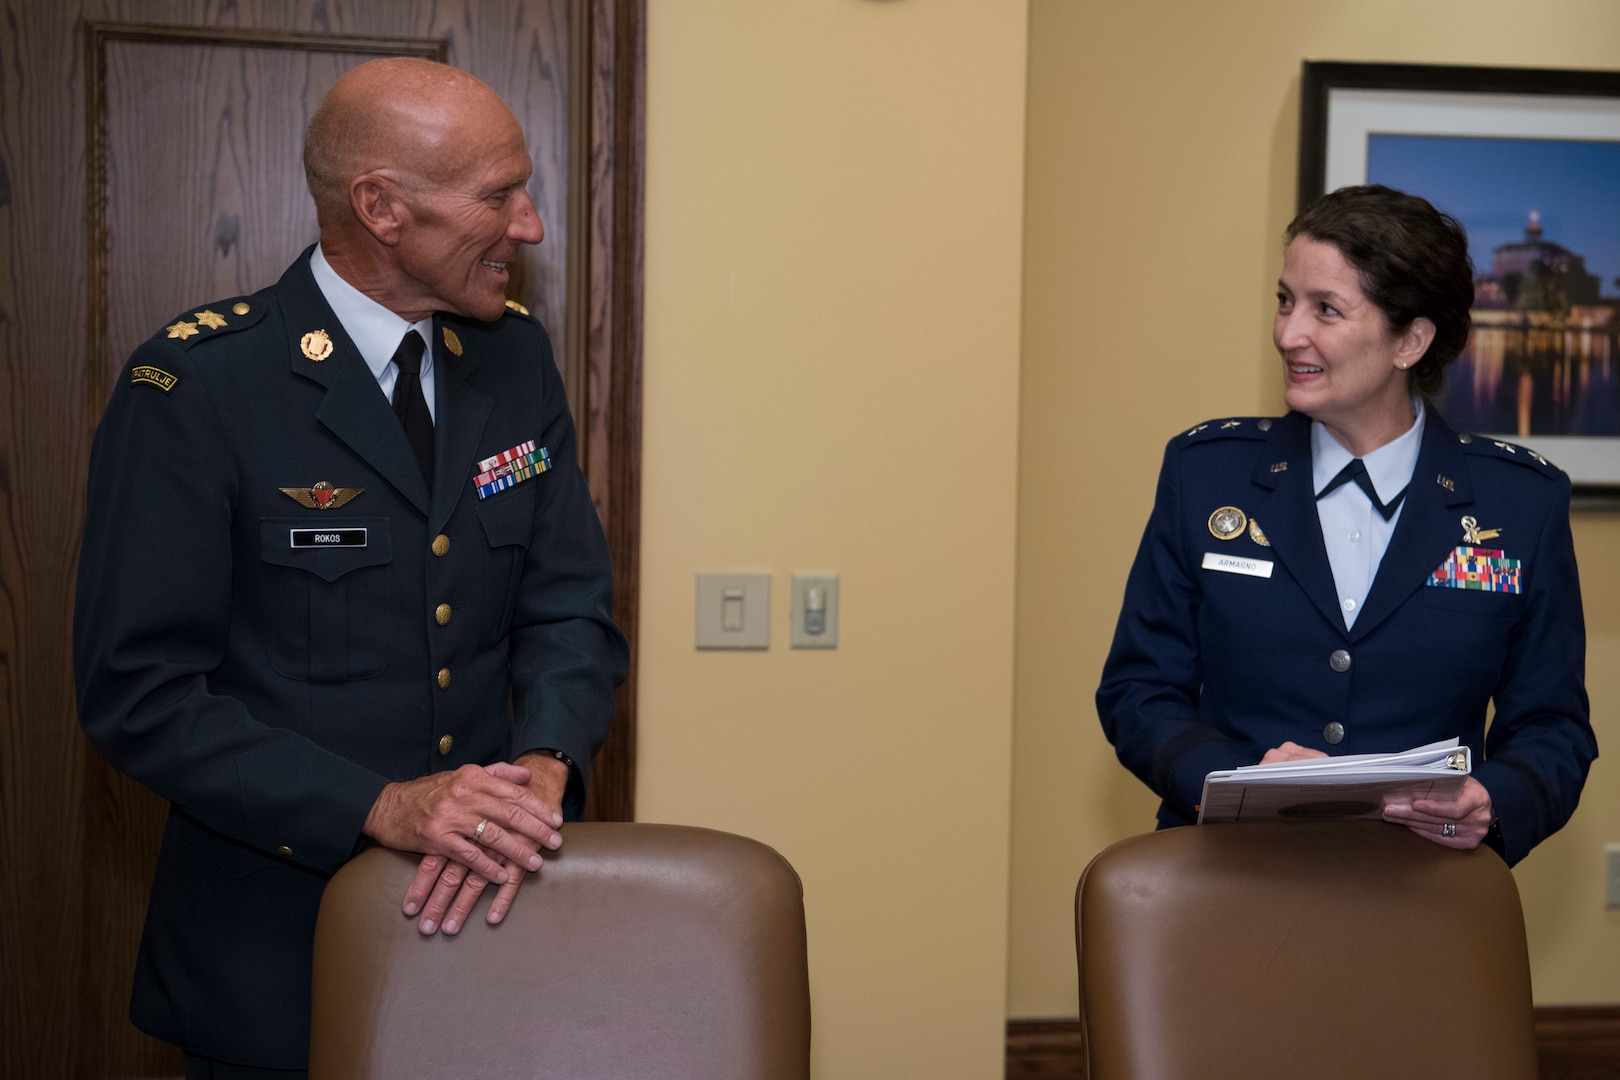 U.S. Air Force Maj. Gen. Nina Armagno (right), U.S. Strategic Command (USSTRATCOM) director of plans and policy, speaks with Maj. Gen. Agner Rokos, representing the Defence Command Denmark and the Ministry of Defence Denmark, before signing a memorandum of understanding at the 34th Annual Space Symposium Apr. 17, 2018. The memorandum authorizes sharing space situational awareness services and information with the Defence Command and Ministry of Defence for Denmark. Denmark joins 13 nations (the United Kingdom, the Republic of Korea, France, Canada, Italy, Japan, Israel, Spain, Germany, Australia, the United Arab Emirates, Belgium and Norway), two intergovernmental organizations (the European Space Agency and the European Organization for the Exploitation of Meteorological Satellites) and more than 65 commercial satellite owner/operator/launchers already participating in SSA data-sharing agreements with USSTRATCOM.